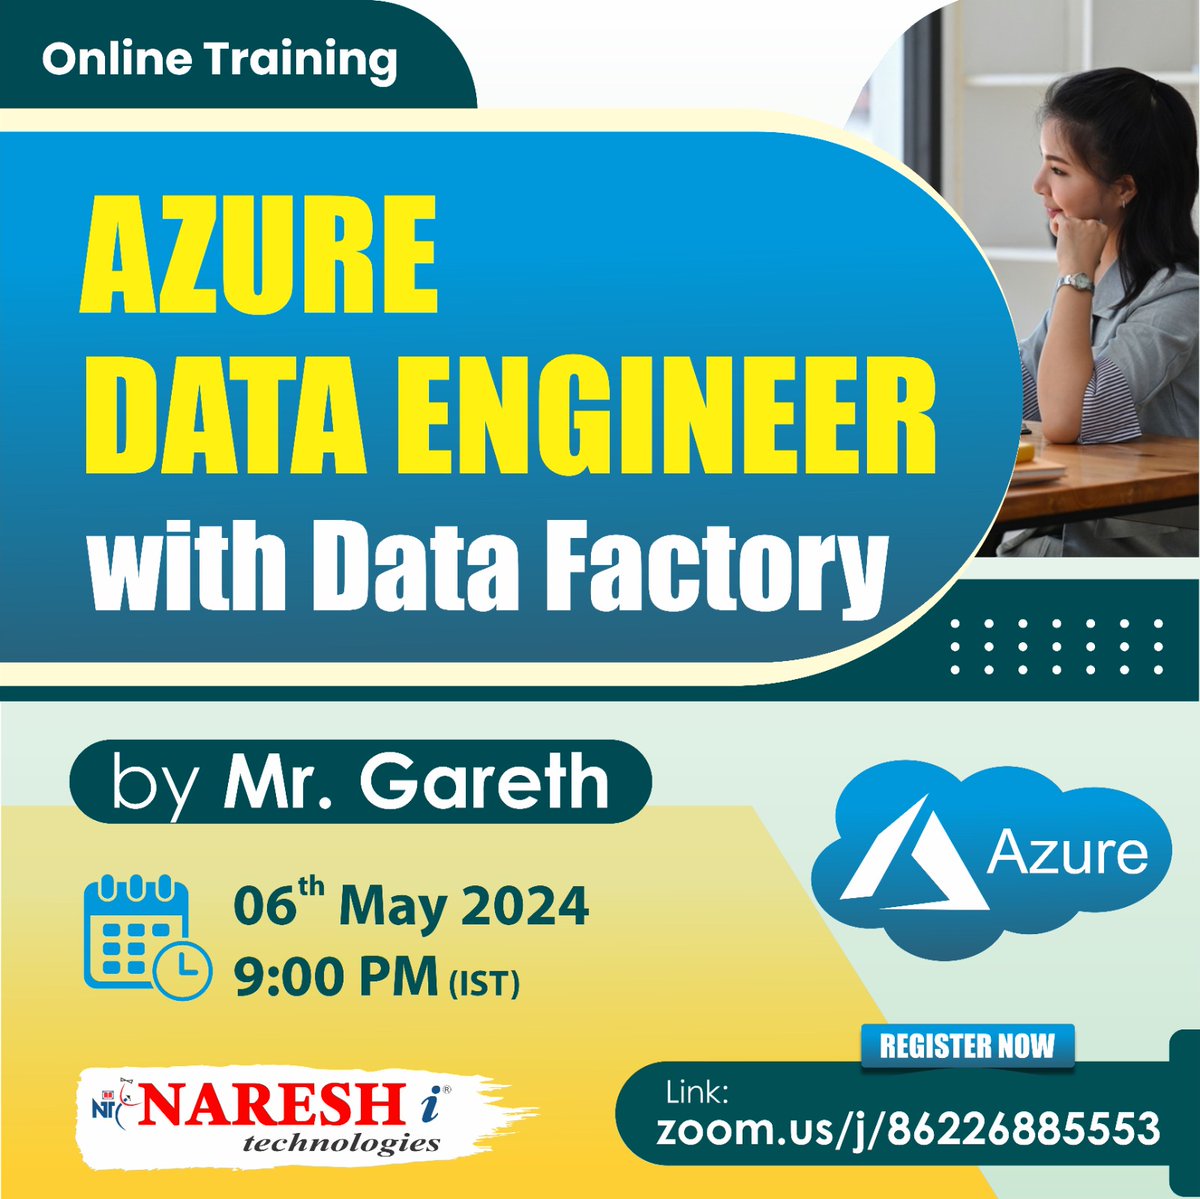 ✍Enroll Now: bit.ly/3QhLDqQ
👉Attend a Free Demo On Azure Data Engineering with Data Factory by Mr. Gareth.
📅Demo on: 6th May @ 9:00 PM (IST)

#Microsoftazure #azuredataengineer #microsoft #azure #azureadmin #Online #training #Course #education #learning #software